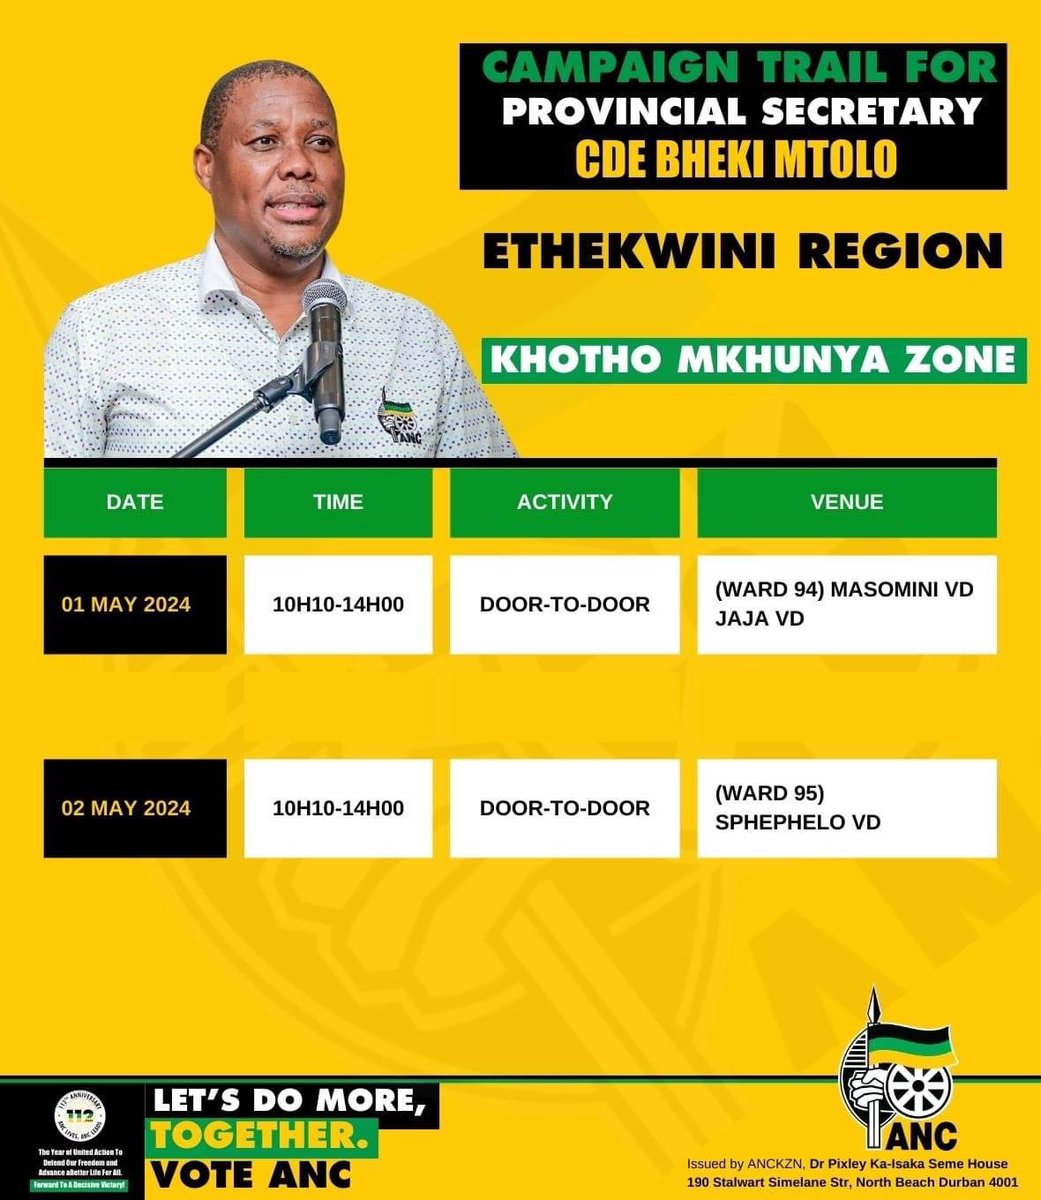 ANC Campaign is steaming ahead today. ANC Provincial Chair Cde Siboniso Duma will attend the May Day Rally today. Energized and focused on propelling ANC to victory, ANC KZN officials will be doing door-to-door and interacting with voters across all corners of the province.